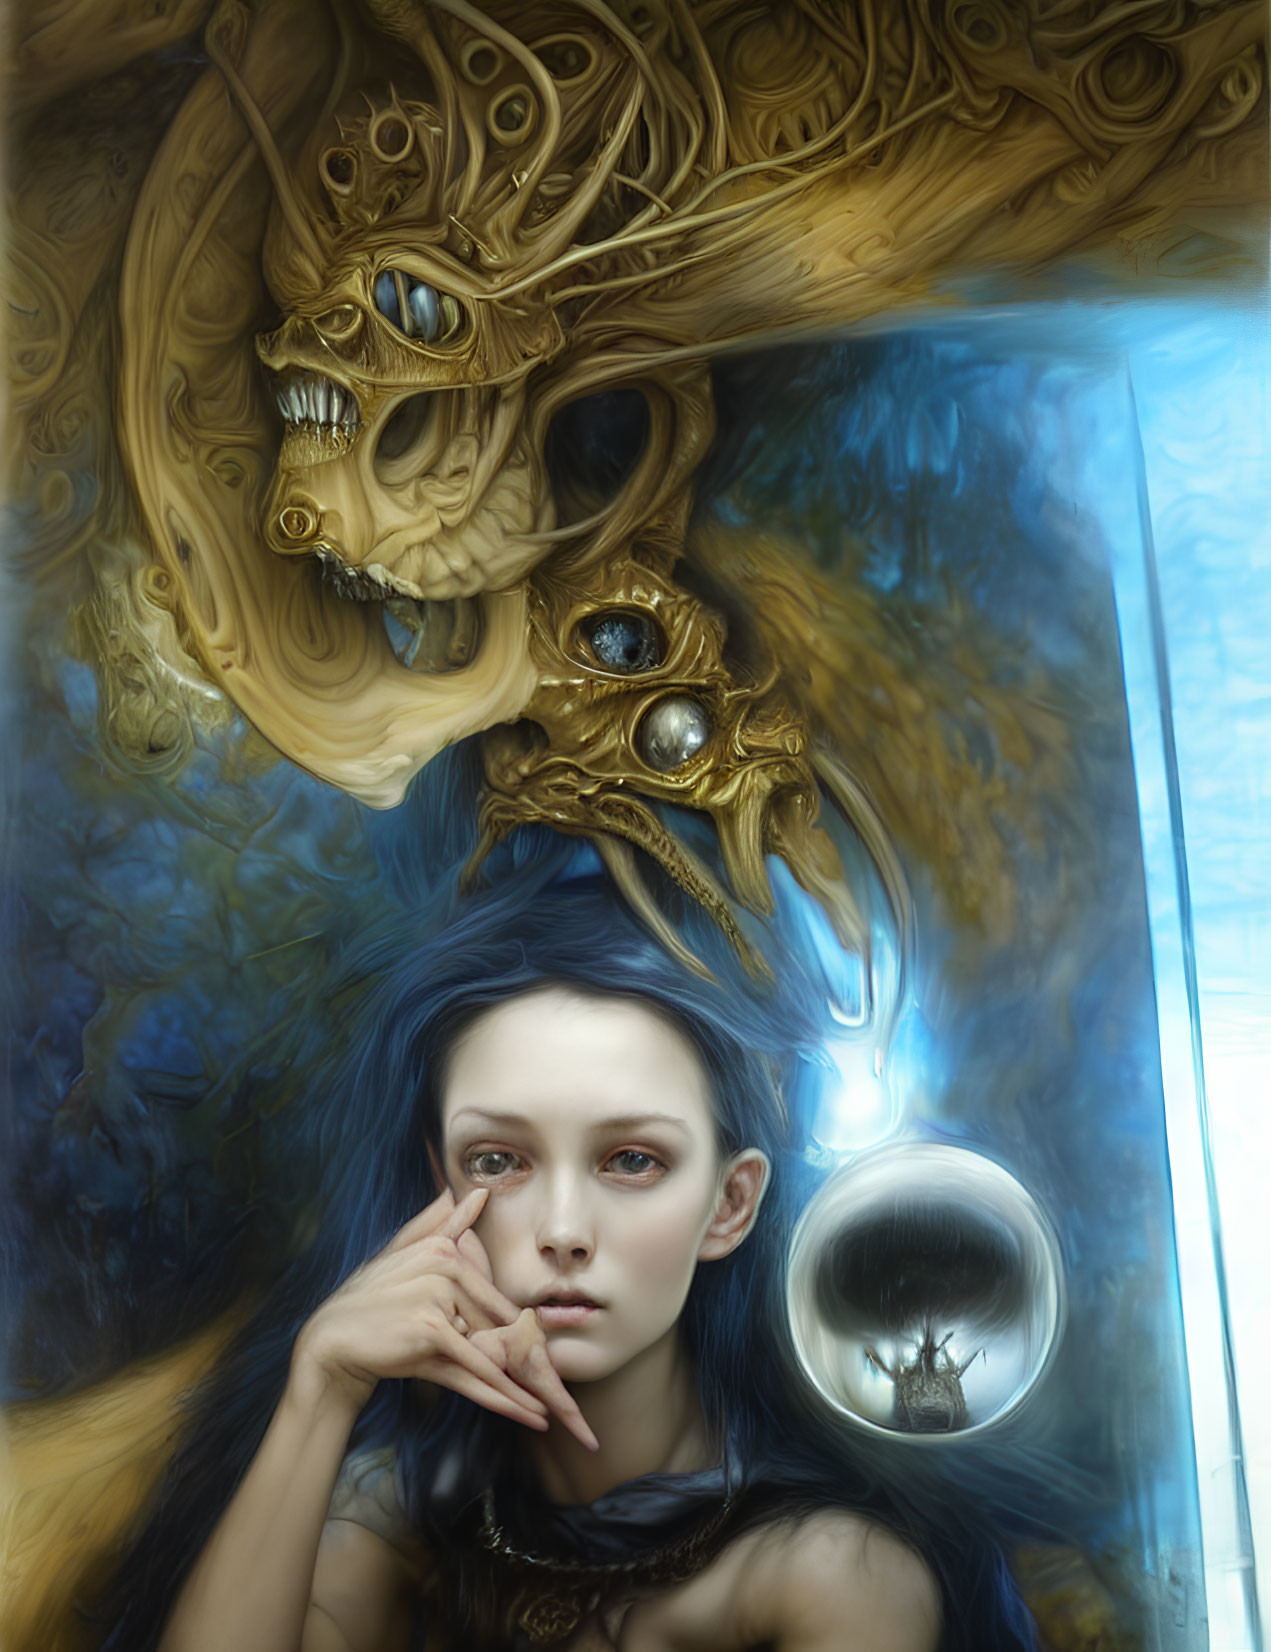 Blue-haired woman with golden patterns and mystical creature in contemplative pose